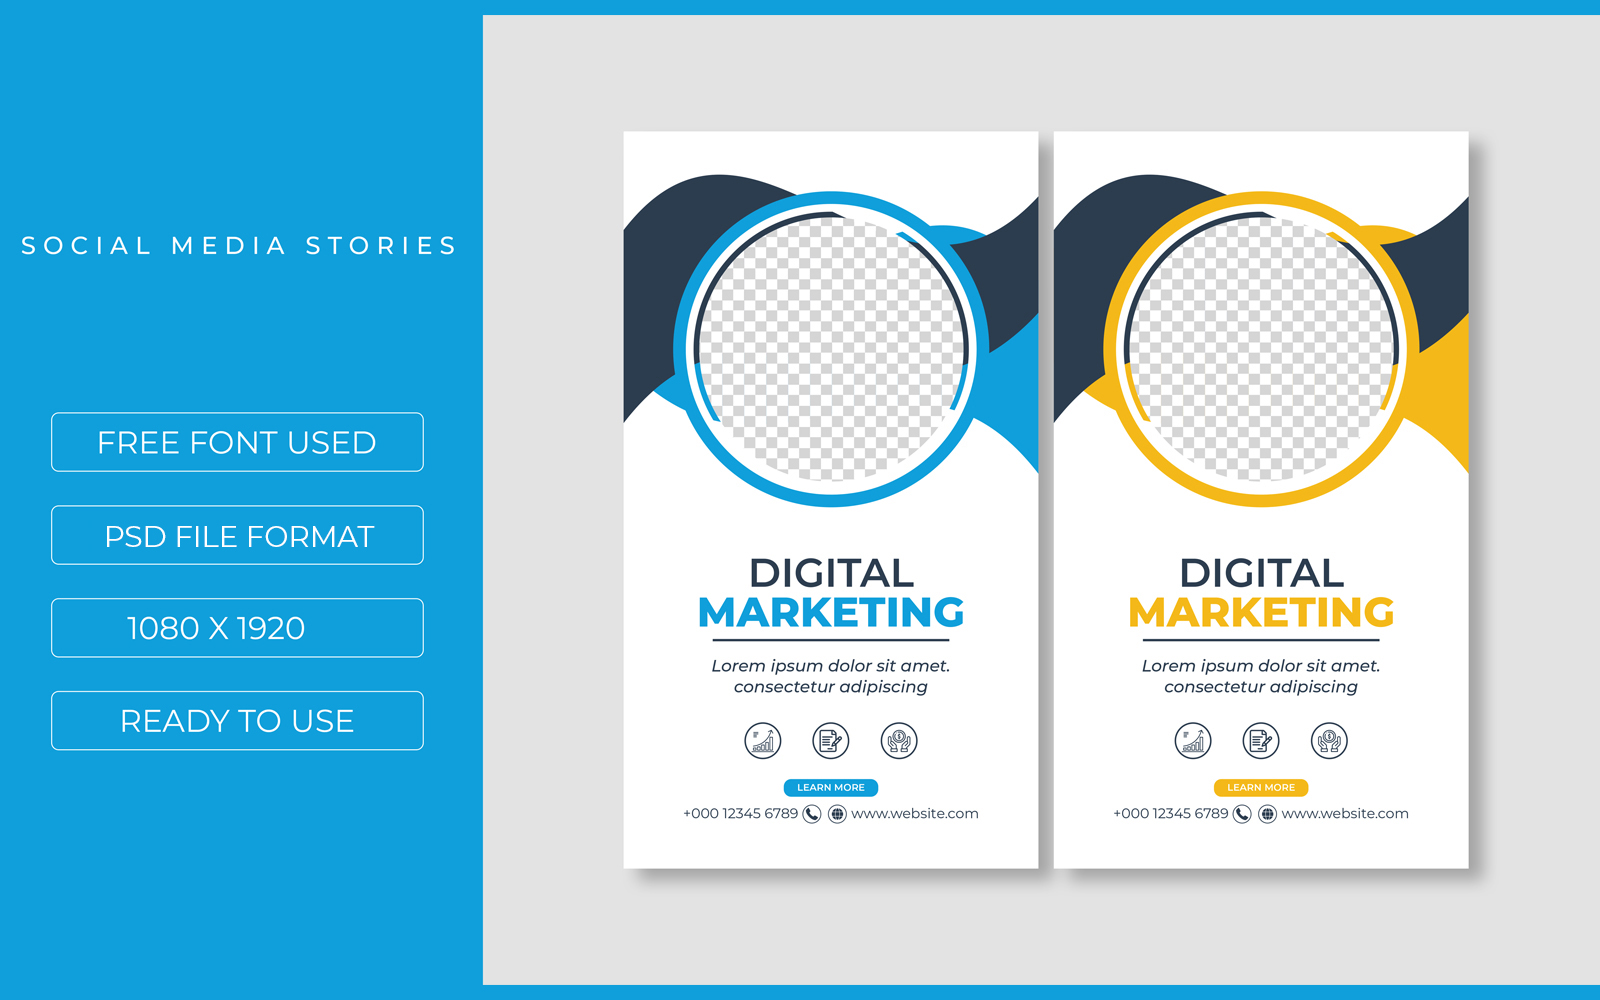 Two Instagram Quote Promotional Templates for Social Media Design